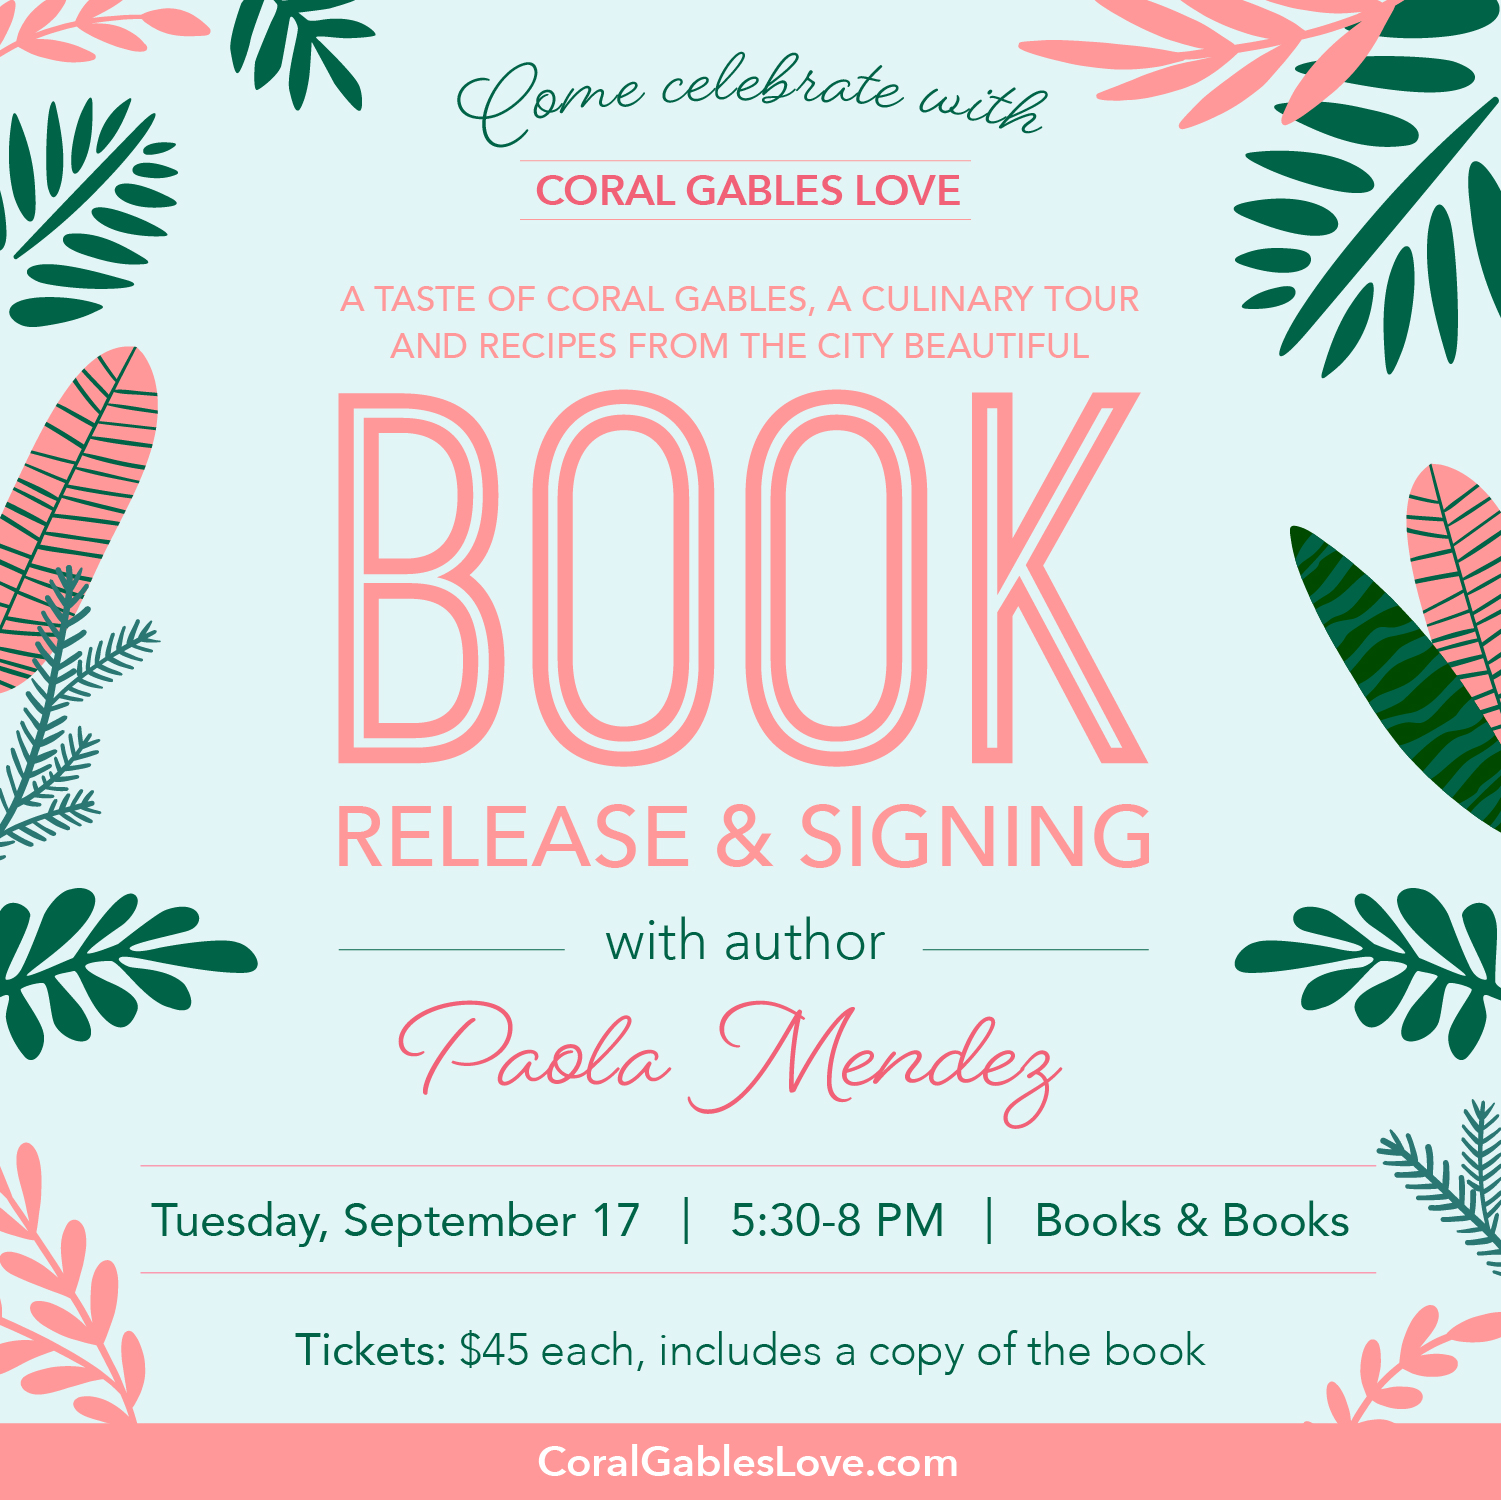 Paola Mendez Book Signing A Taste of Coral Gables